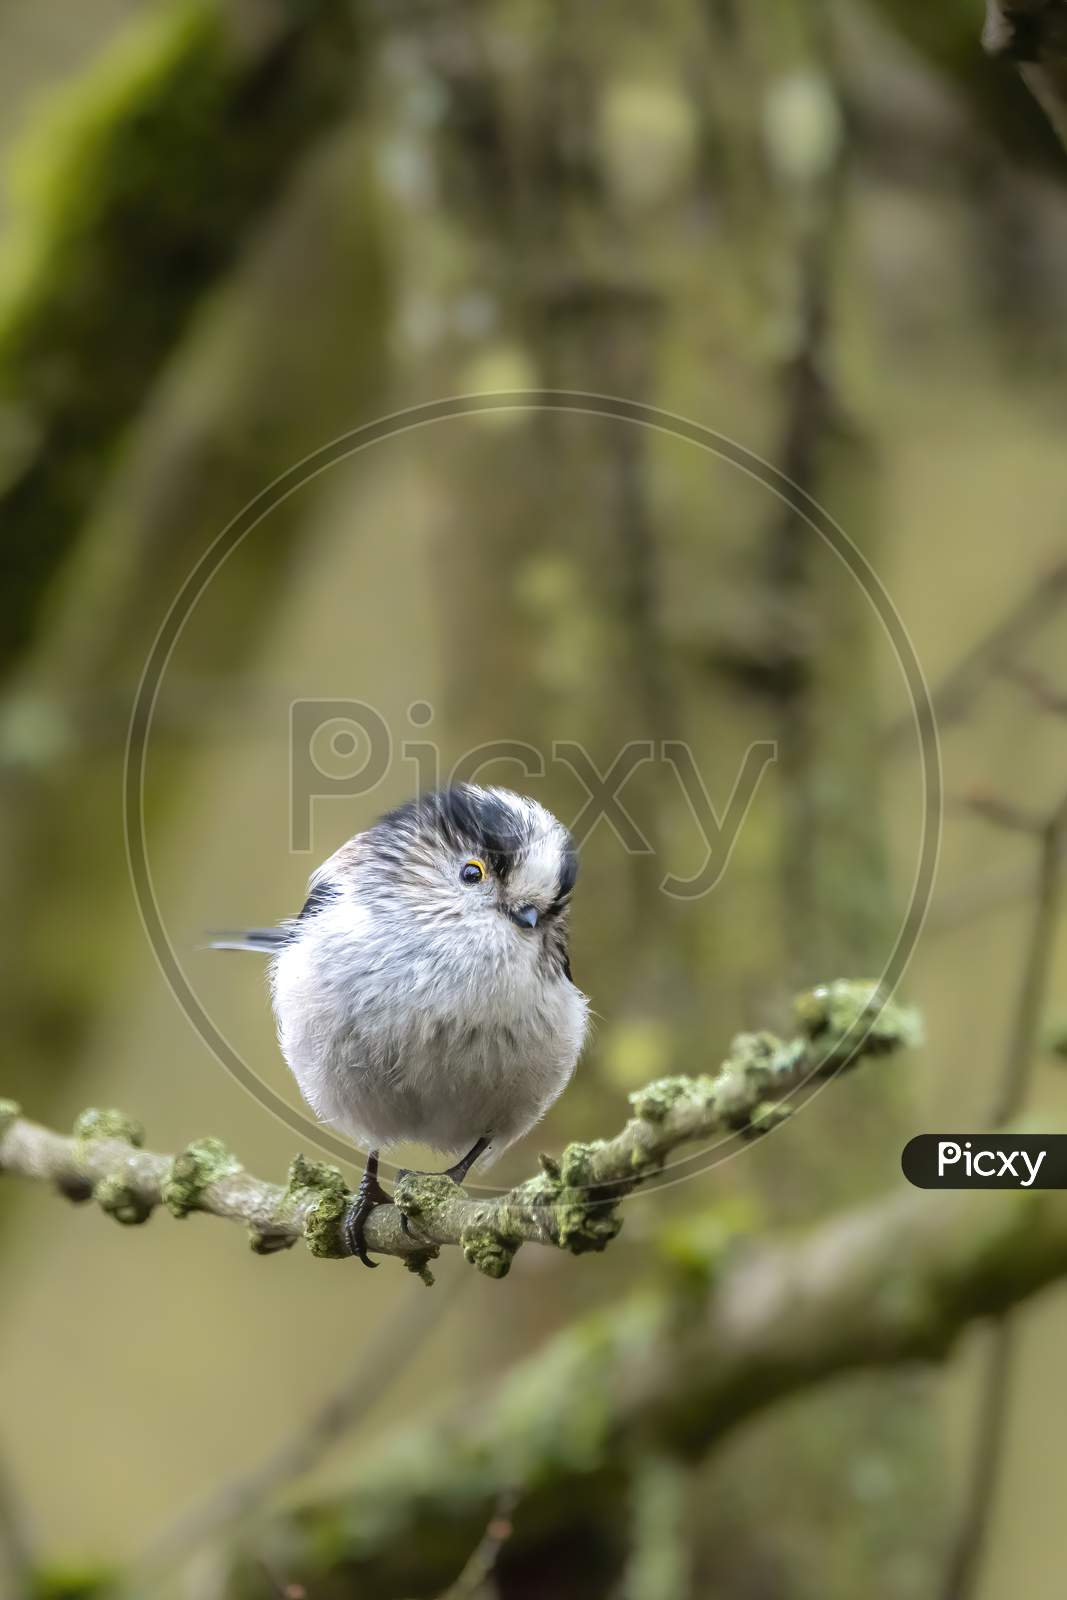 A long-tailed tit sitting on a branch of a tree at the Mönchbruch pond in a natural reserve in Hesse Germany.